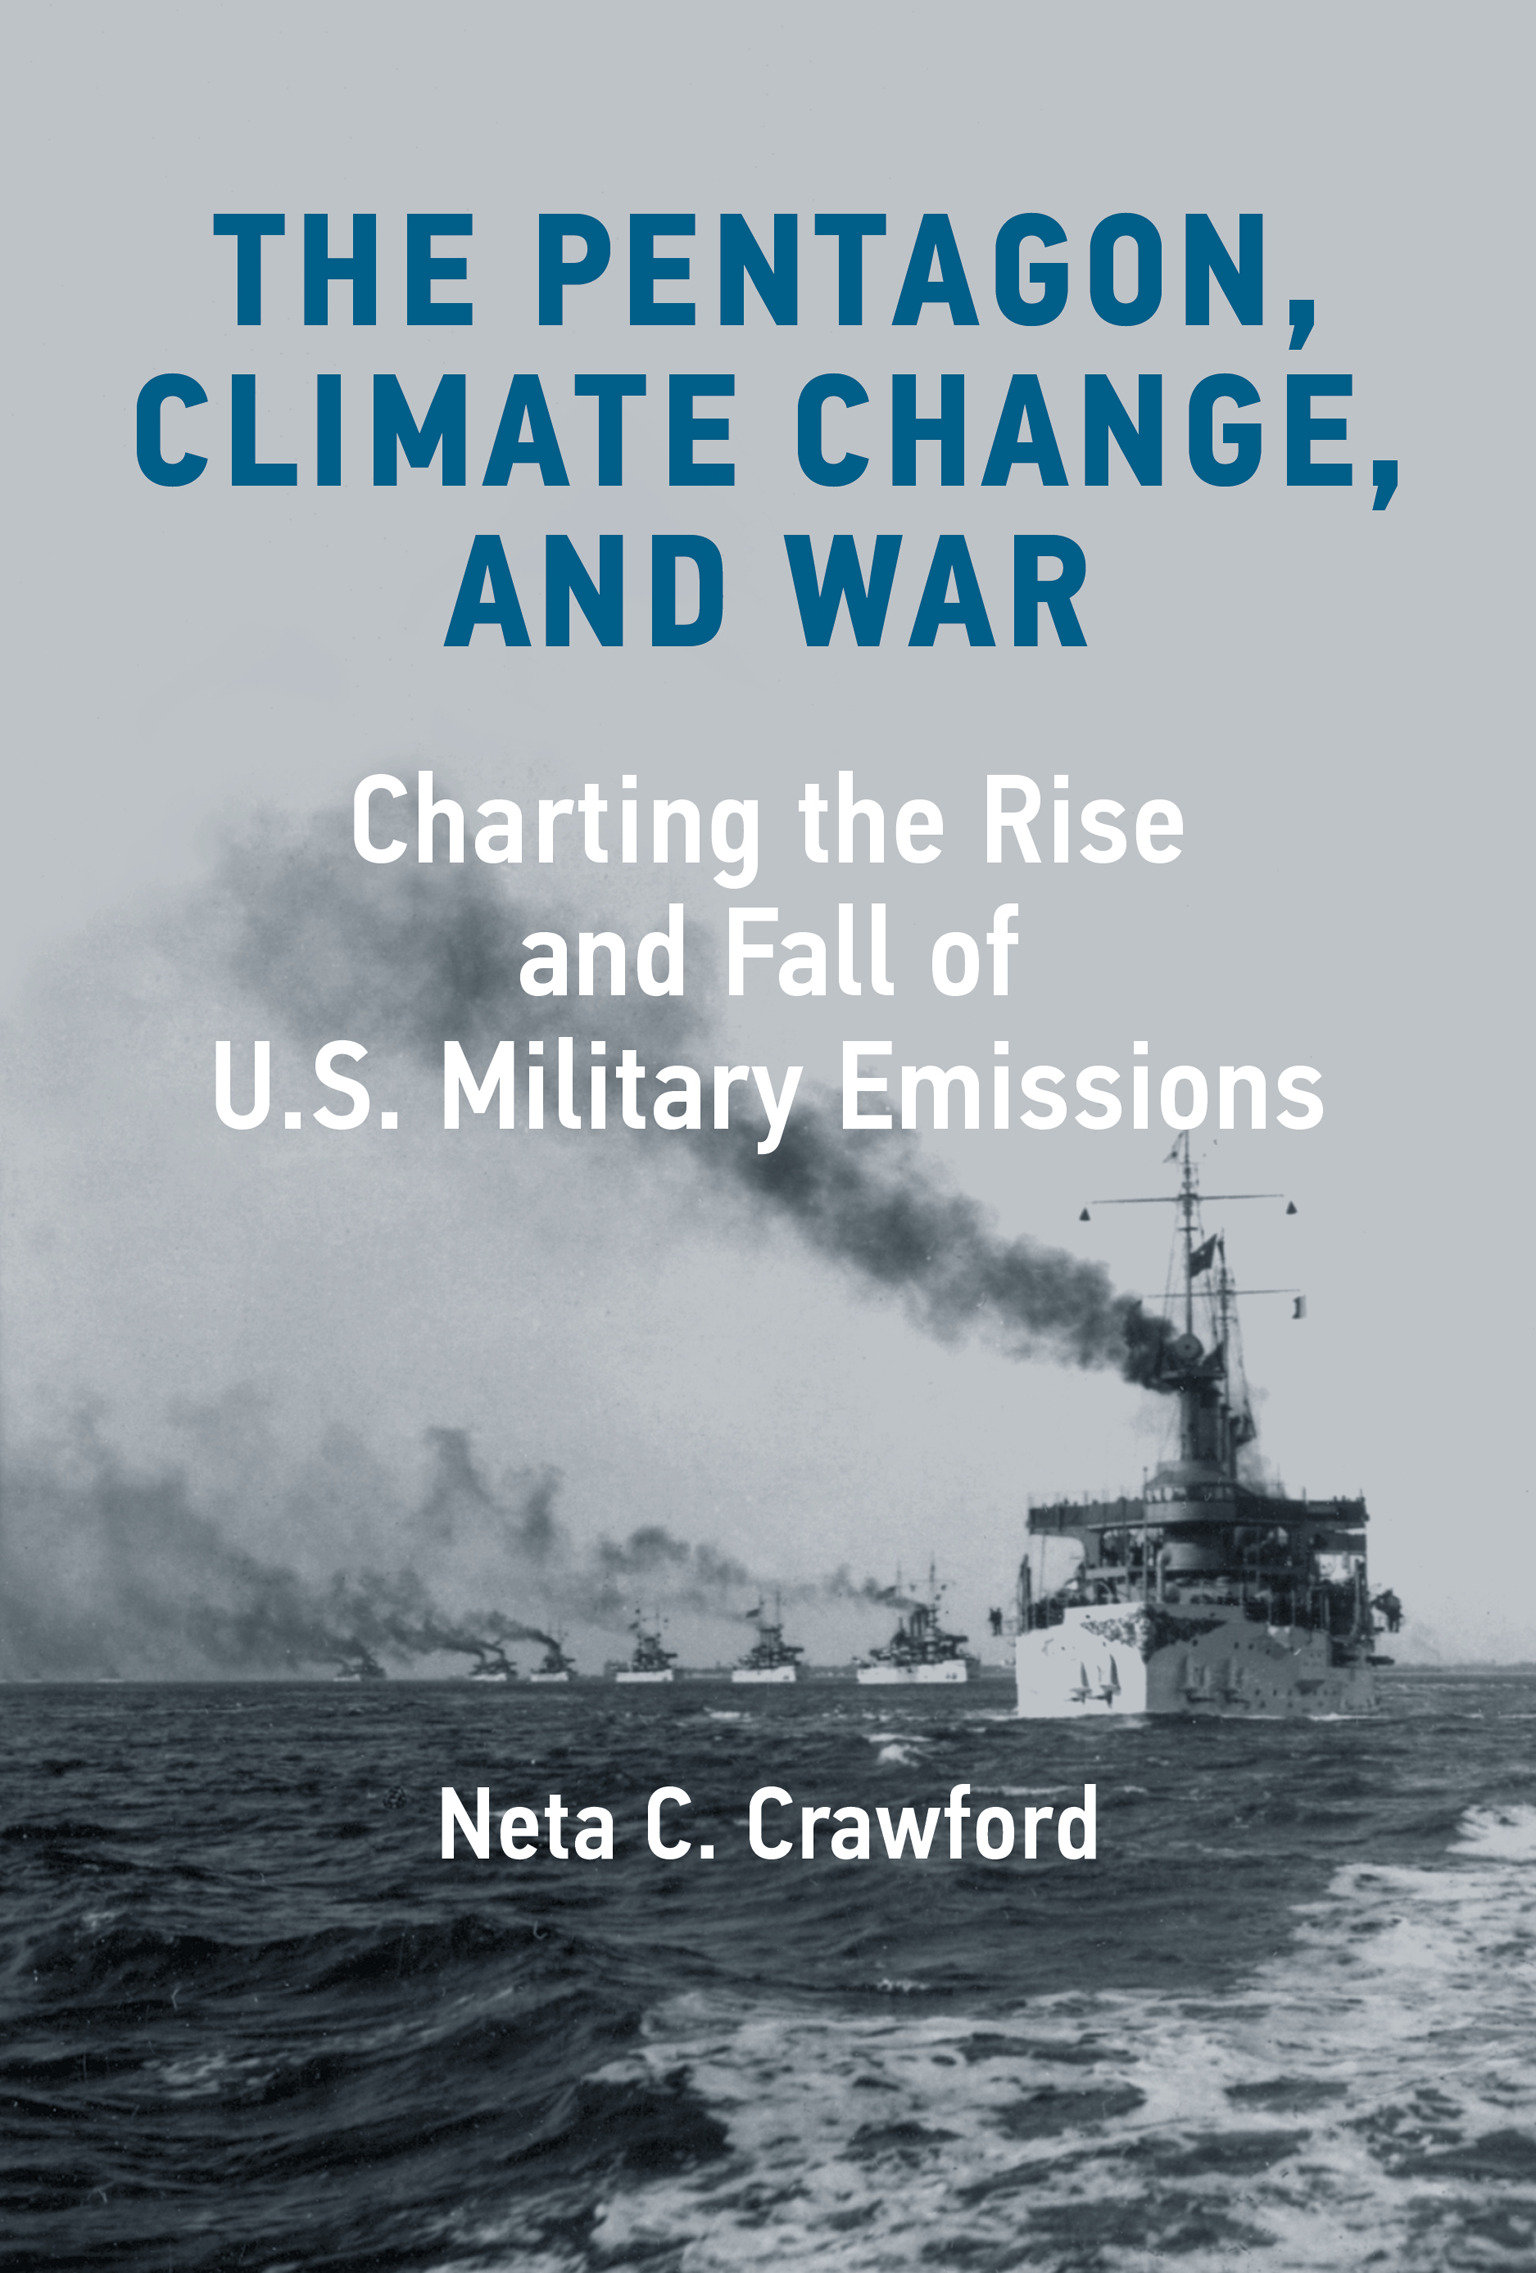 The Pentagon, Climate Change, And War (Hardcover Book)